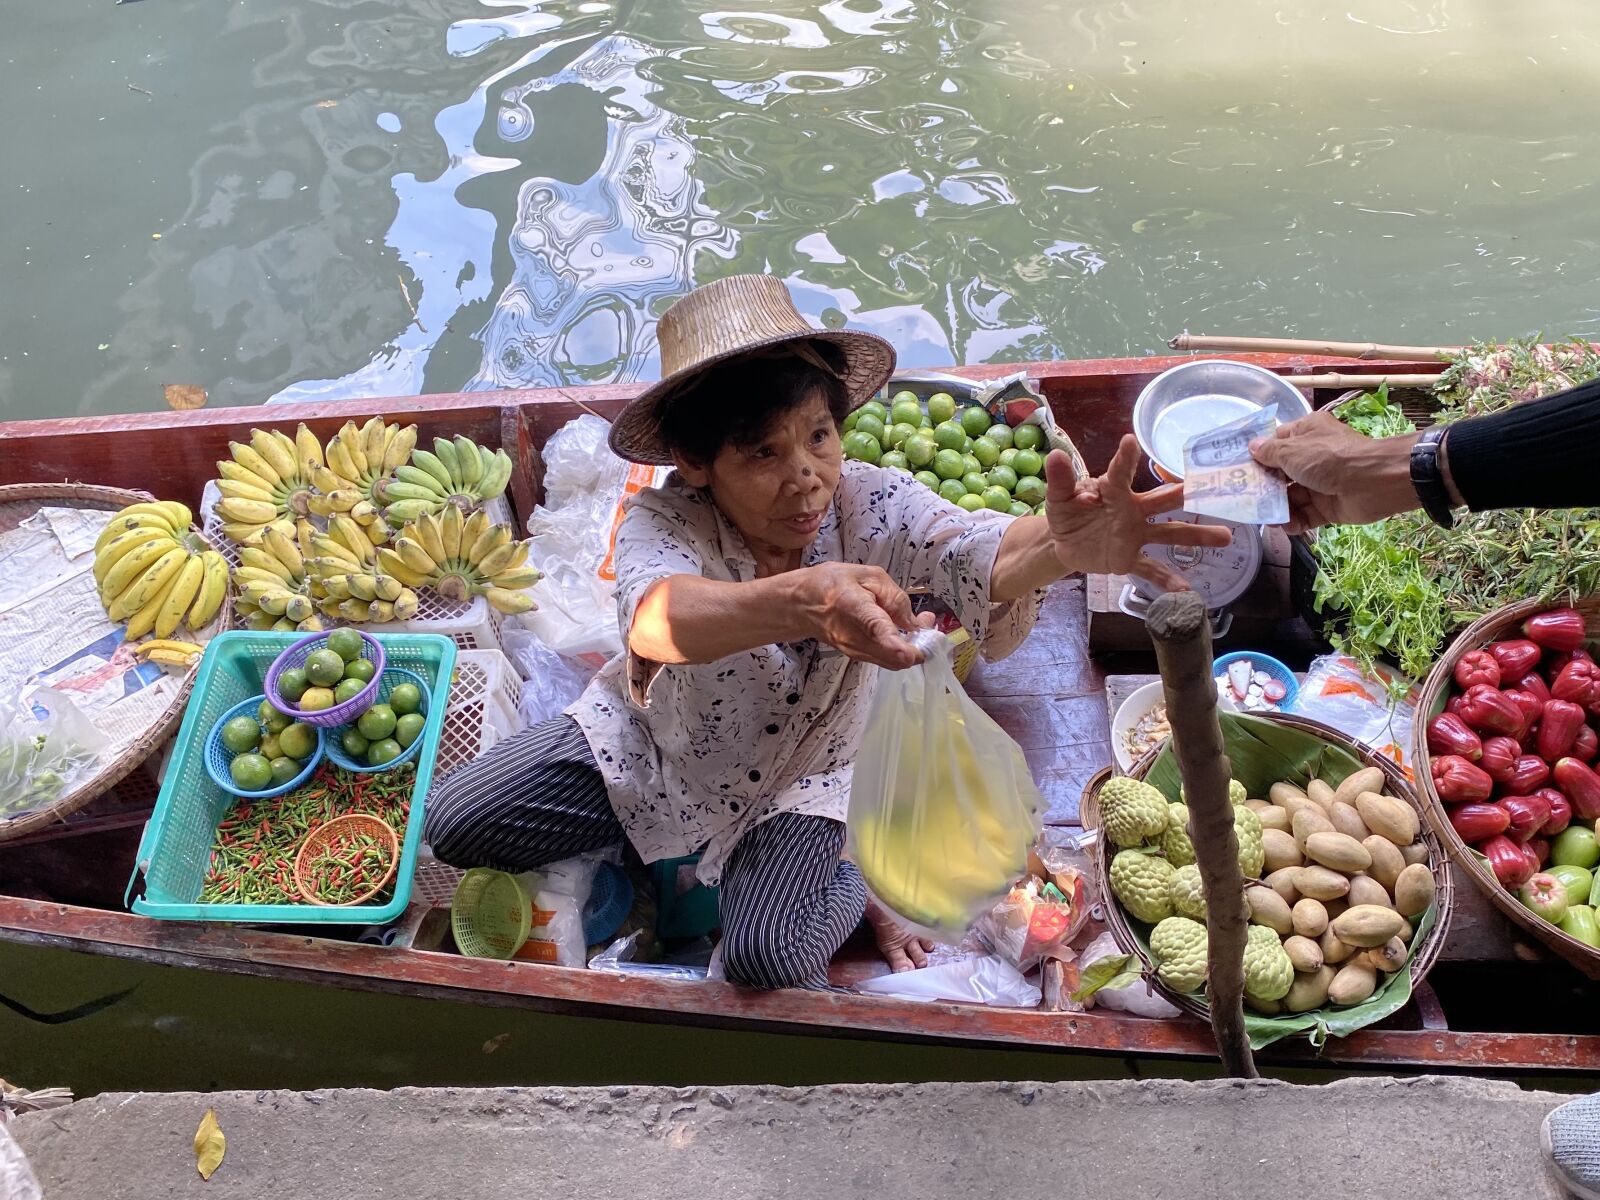 Apple iPhone 11 Pro sample photo. Woman, floating river, market photography